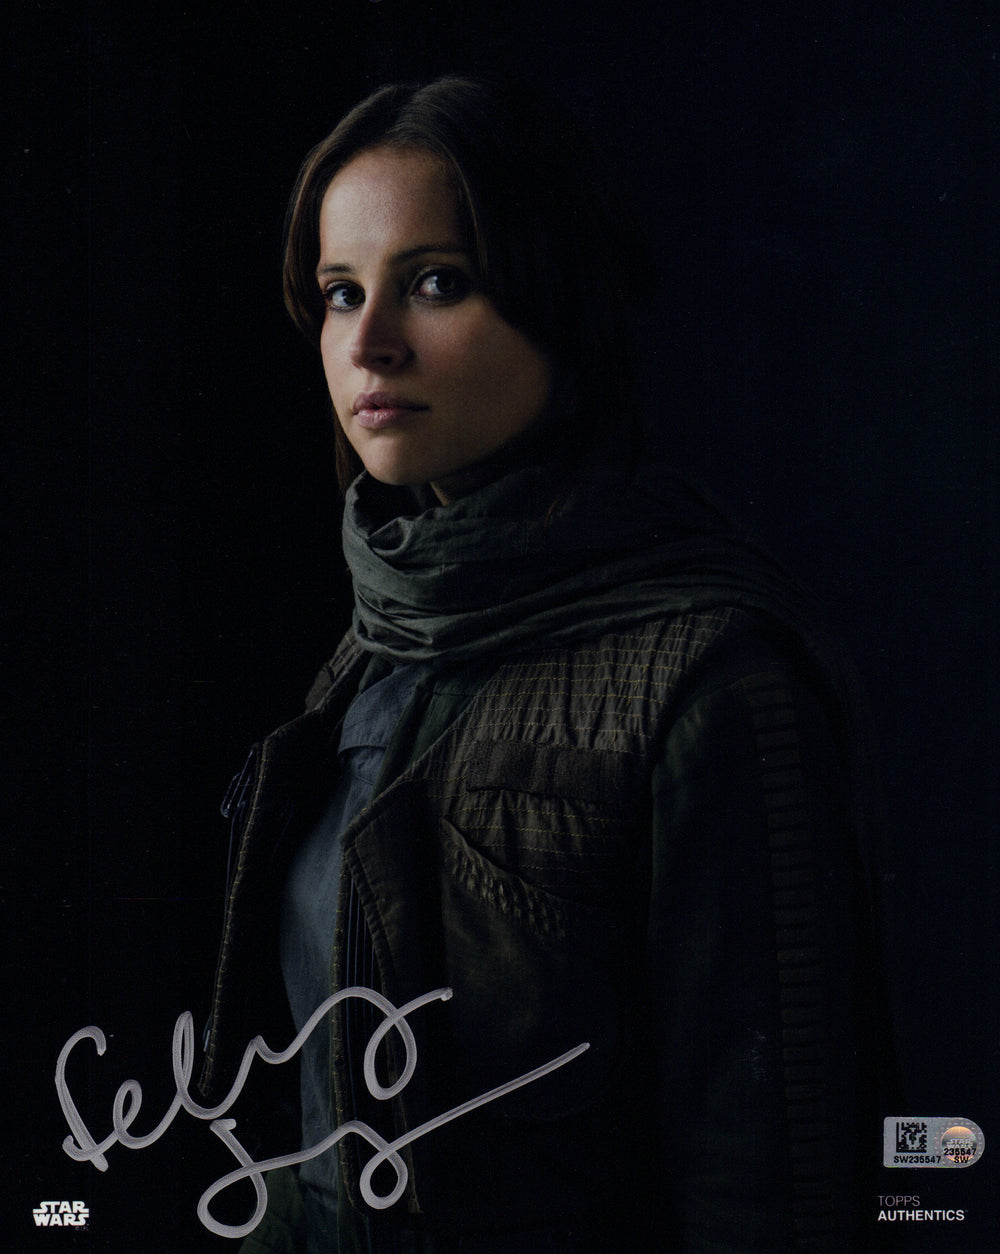 Felicity Jones as Jyn Erso in Rogue One: A Star Wars Story (Topps Authentics) Signed 8x10 Photo